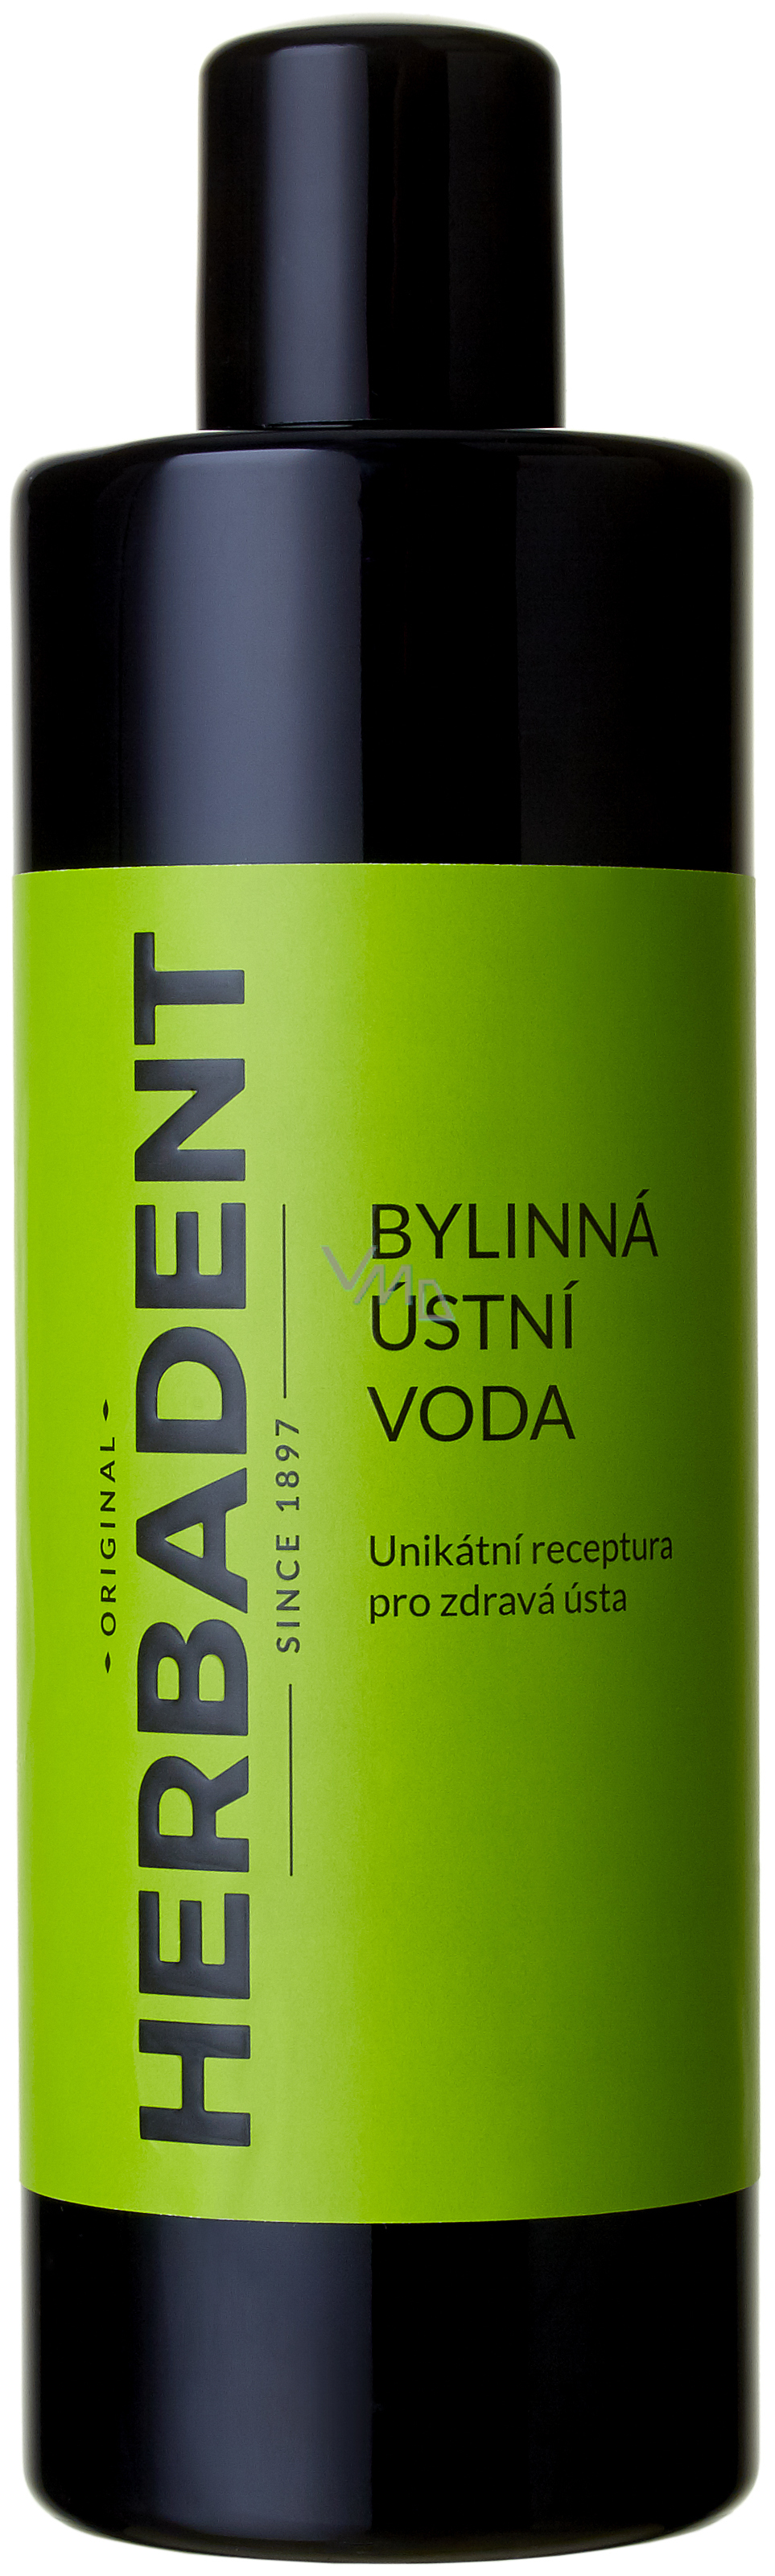 Herbadent Original 7 herbal mouthwash against aphthae, inflammation and ...